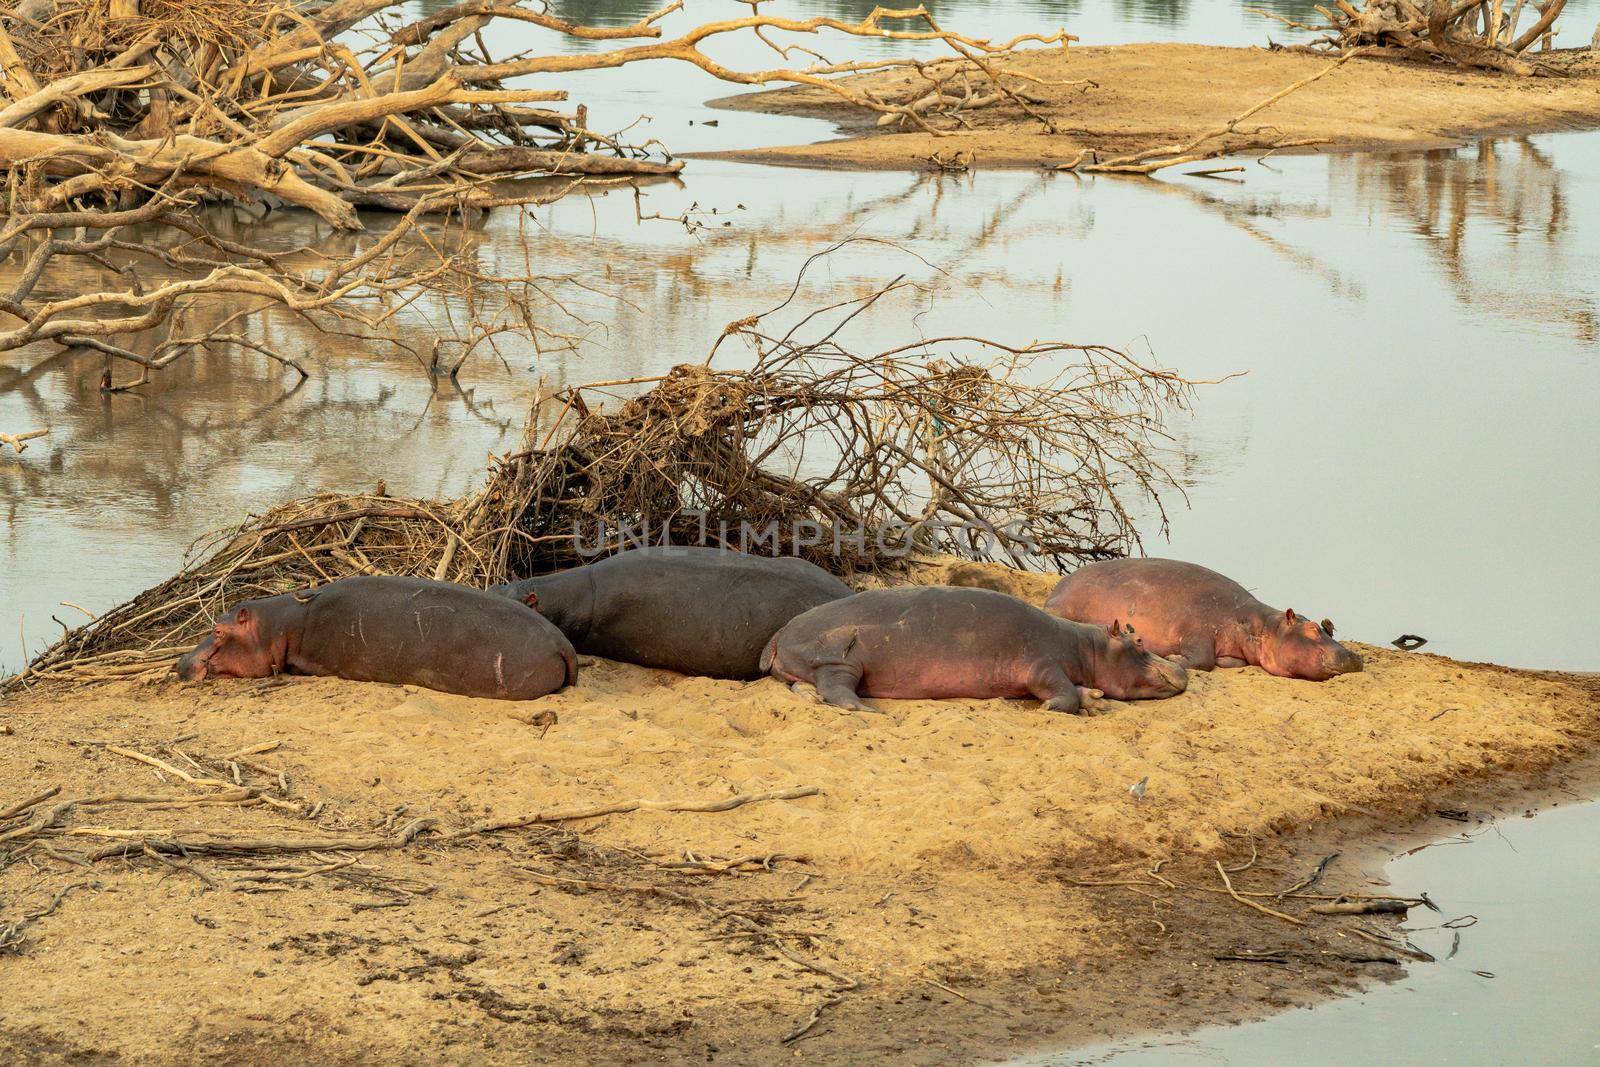 Amazing view of a group of hippos resting on the sandy banks of an African river by silentstock639